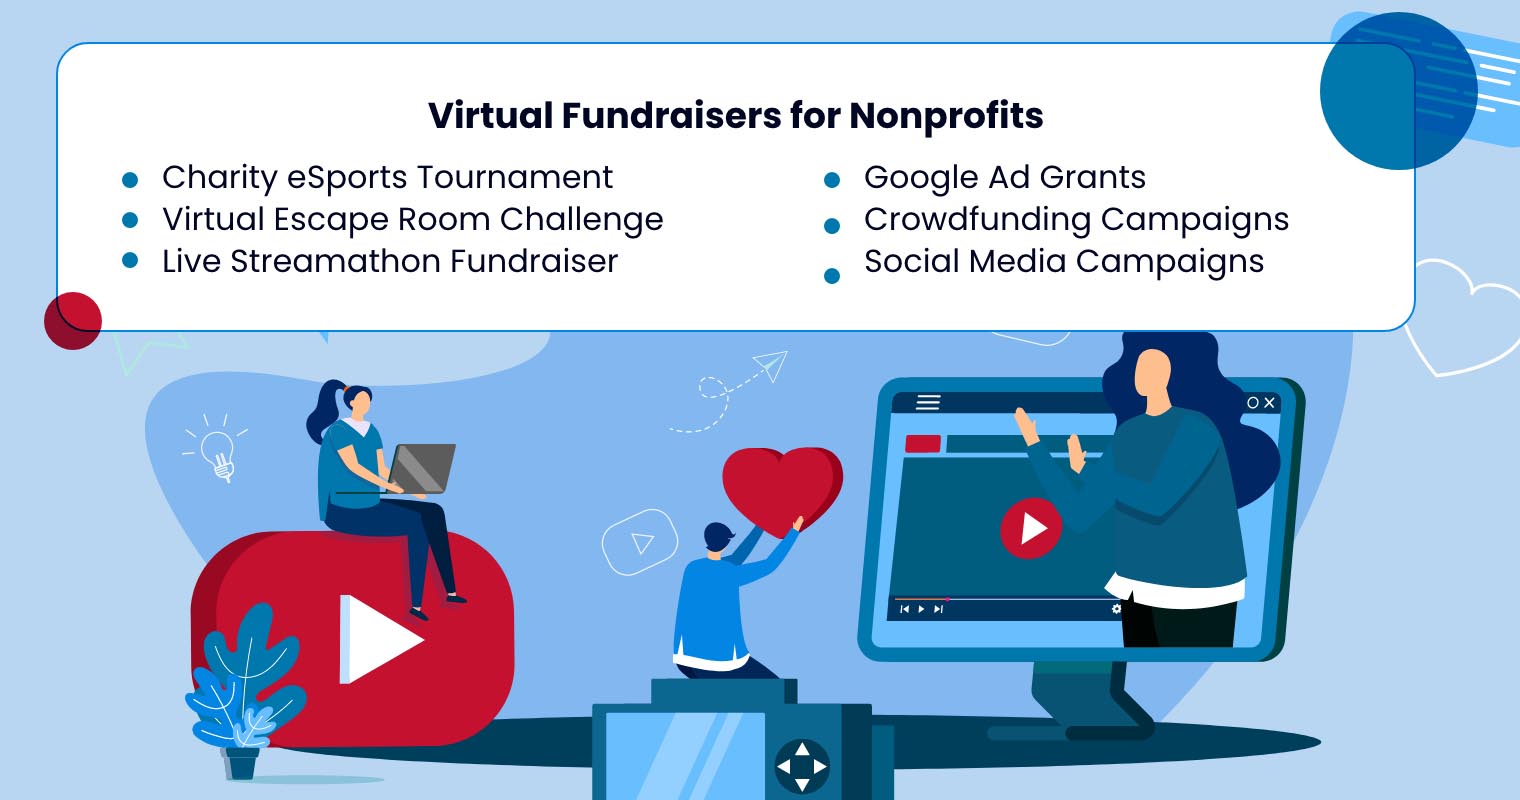 Virtual Fundraisers for Nonprofits